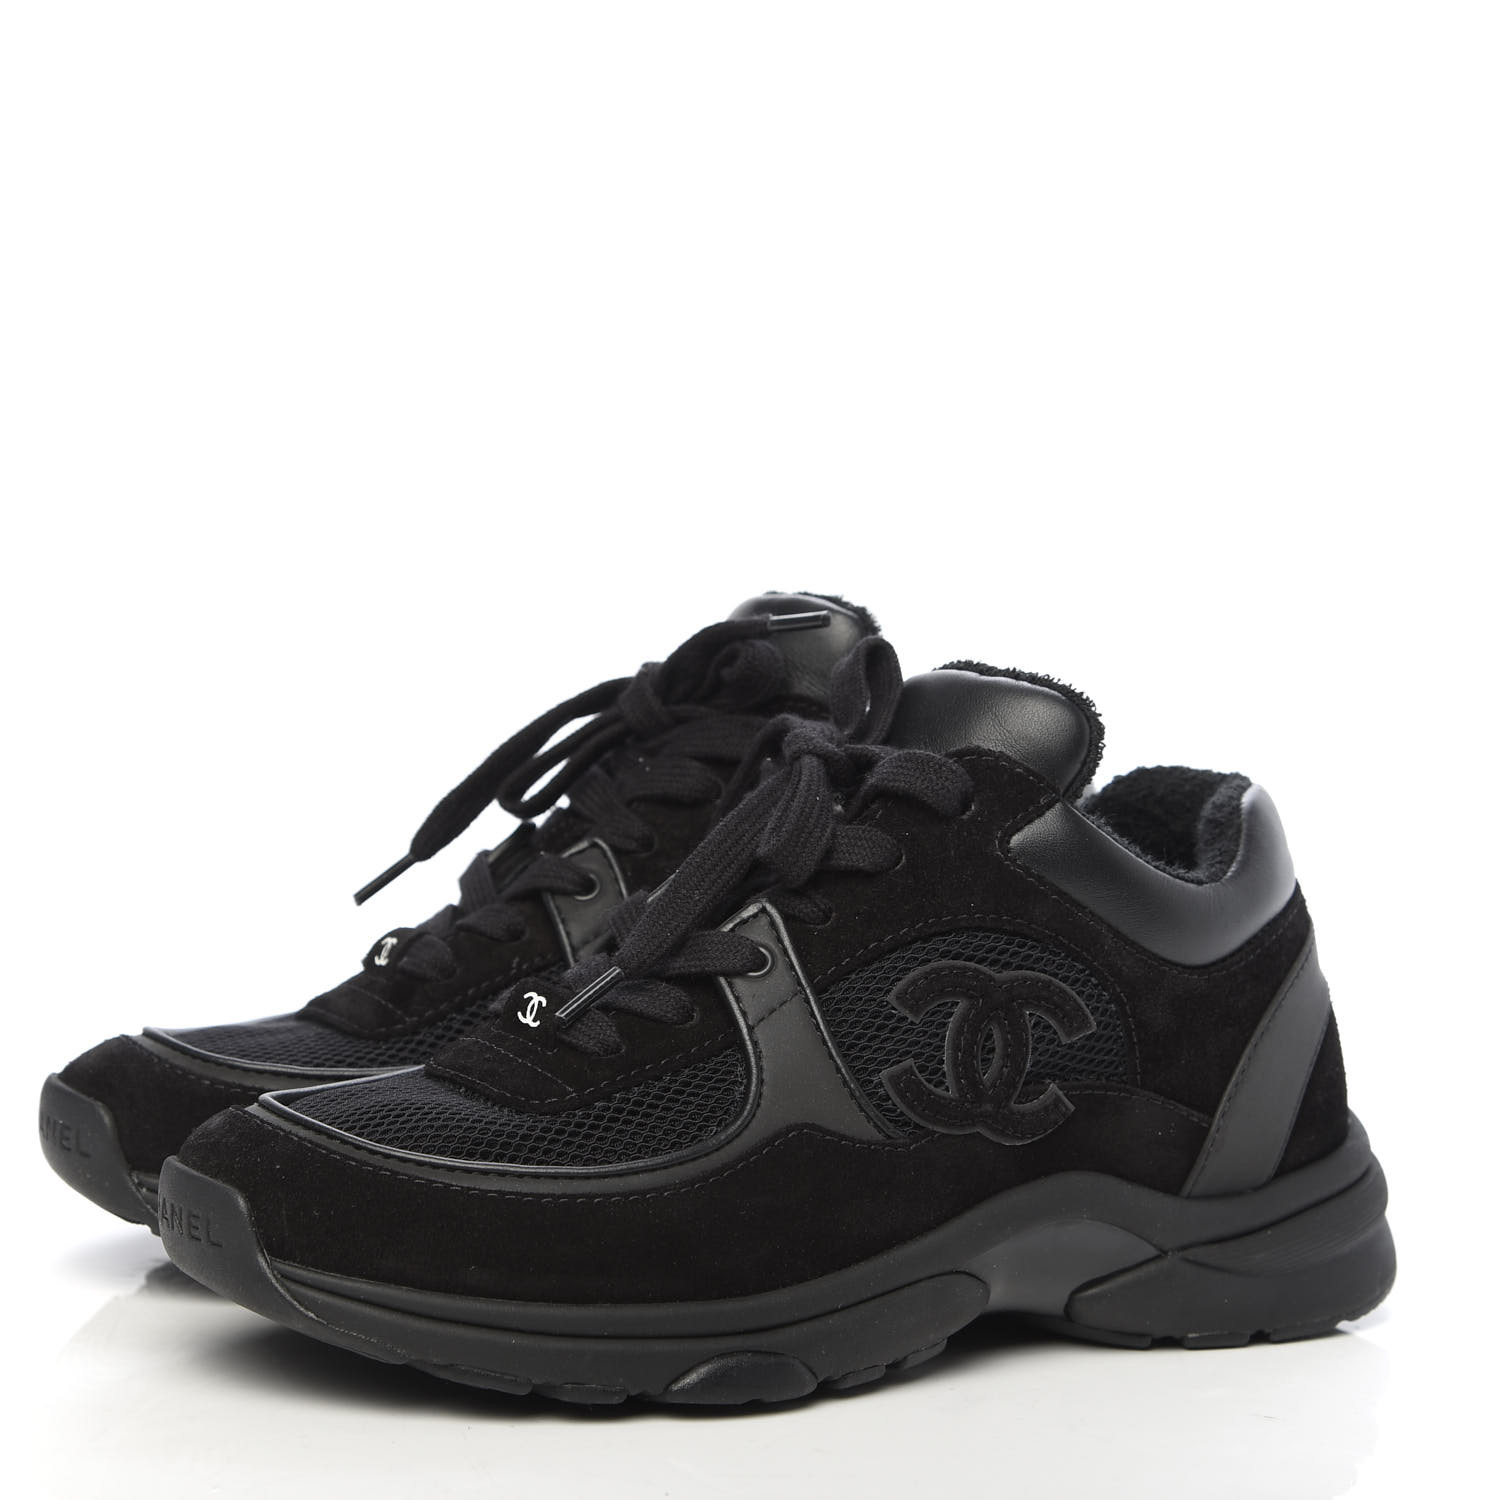 CHANEL Fabric Calfskin Suede CC Sneakers 35.5 Black 682058 | FASHIONPHILE